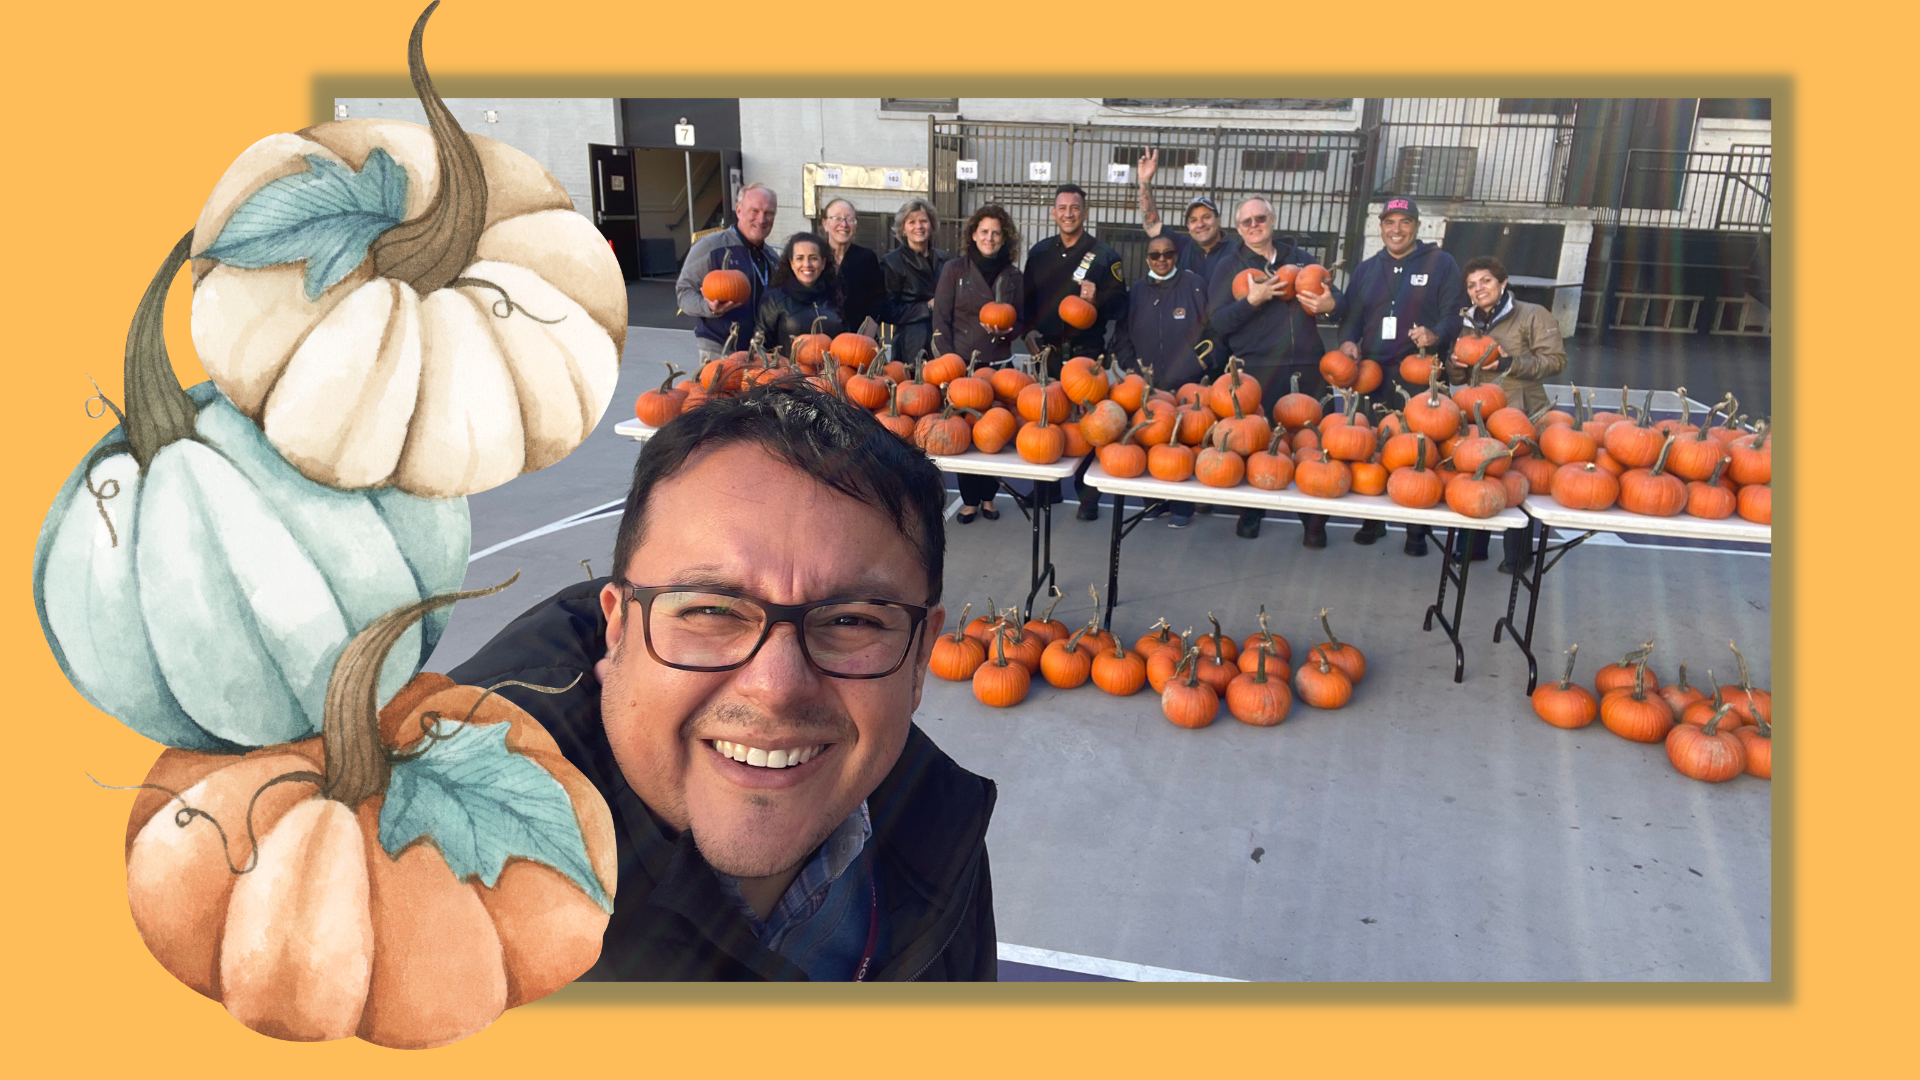 Students enjoying their pumpkins along with staff